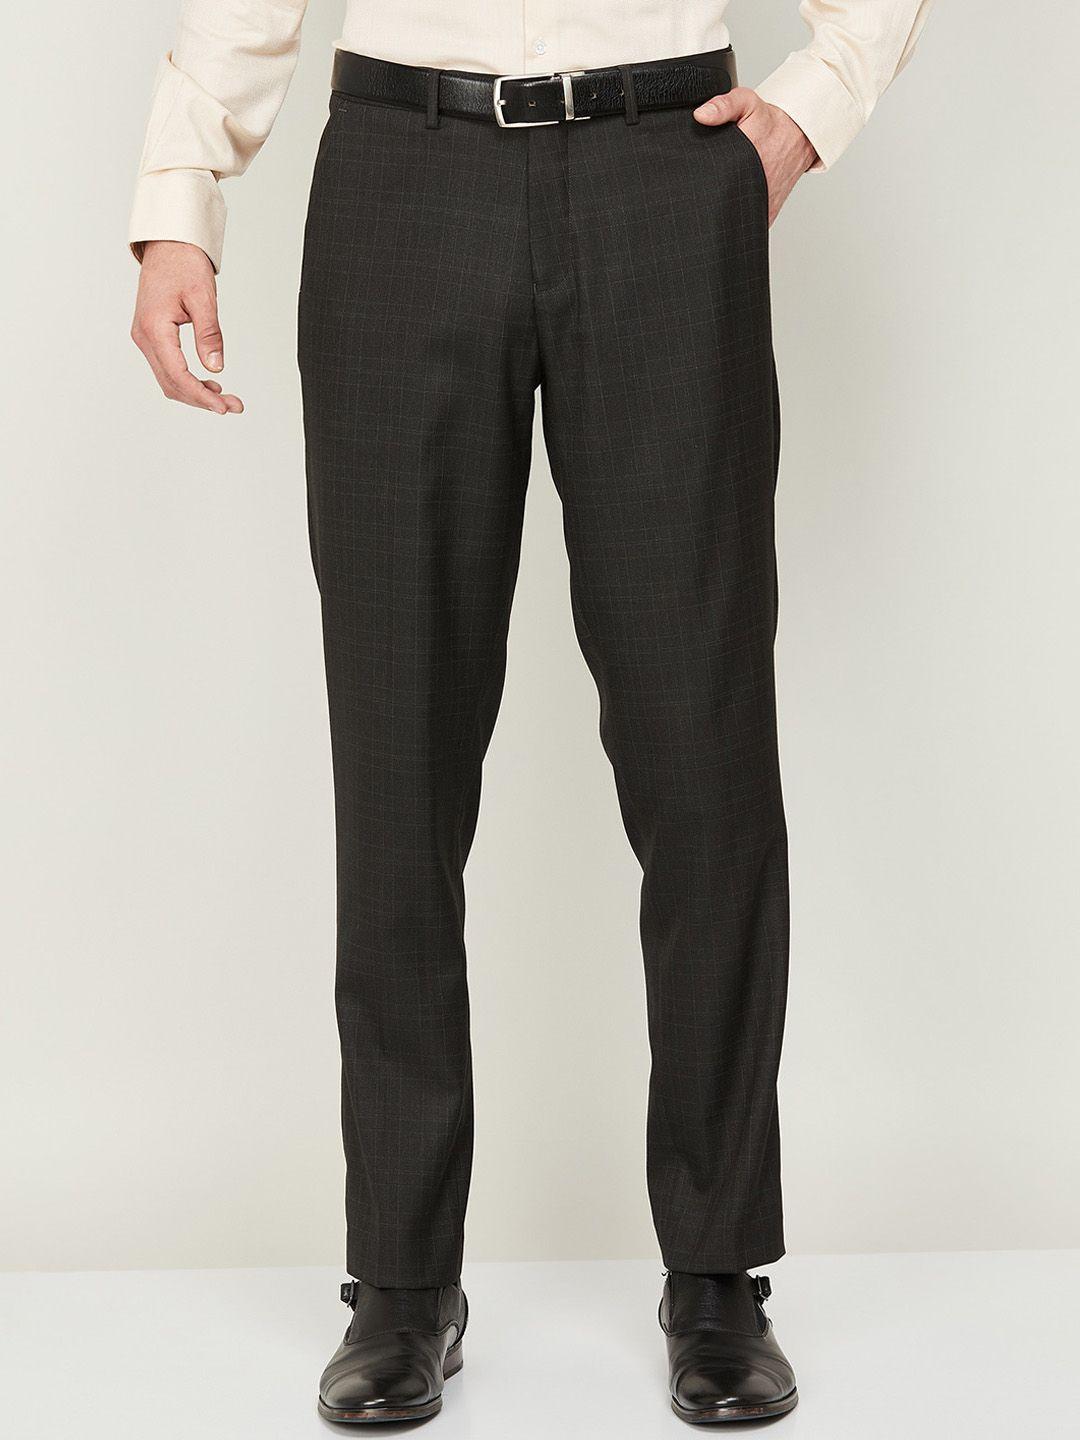 code-by-lifestyle-men-slim-fit-formal-trousers